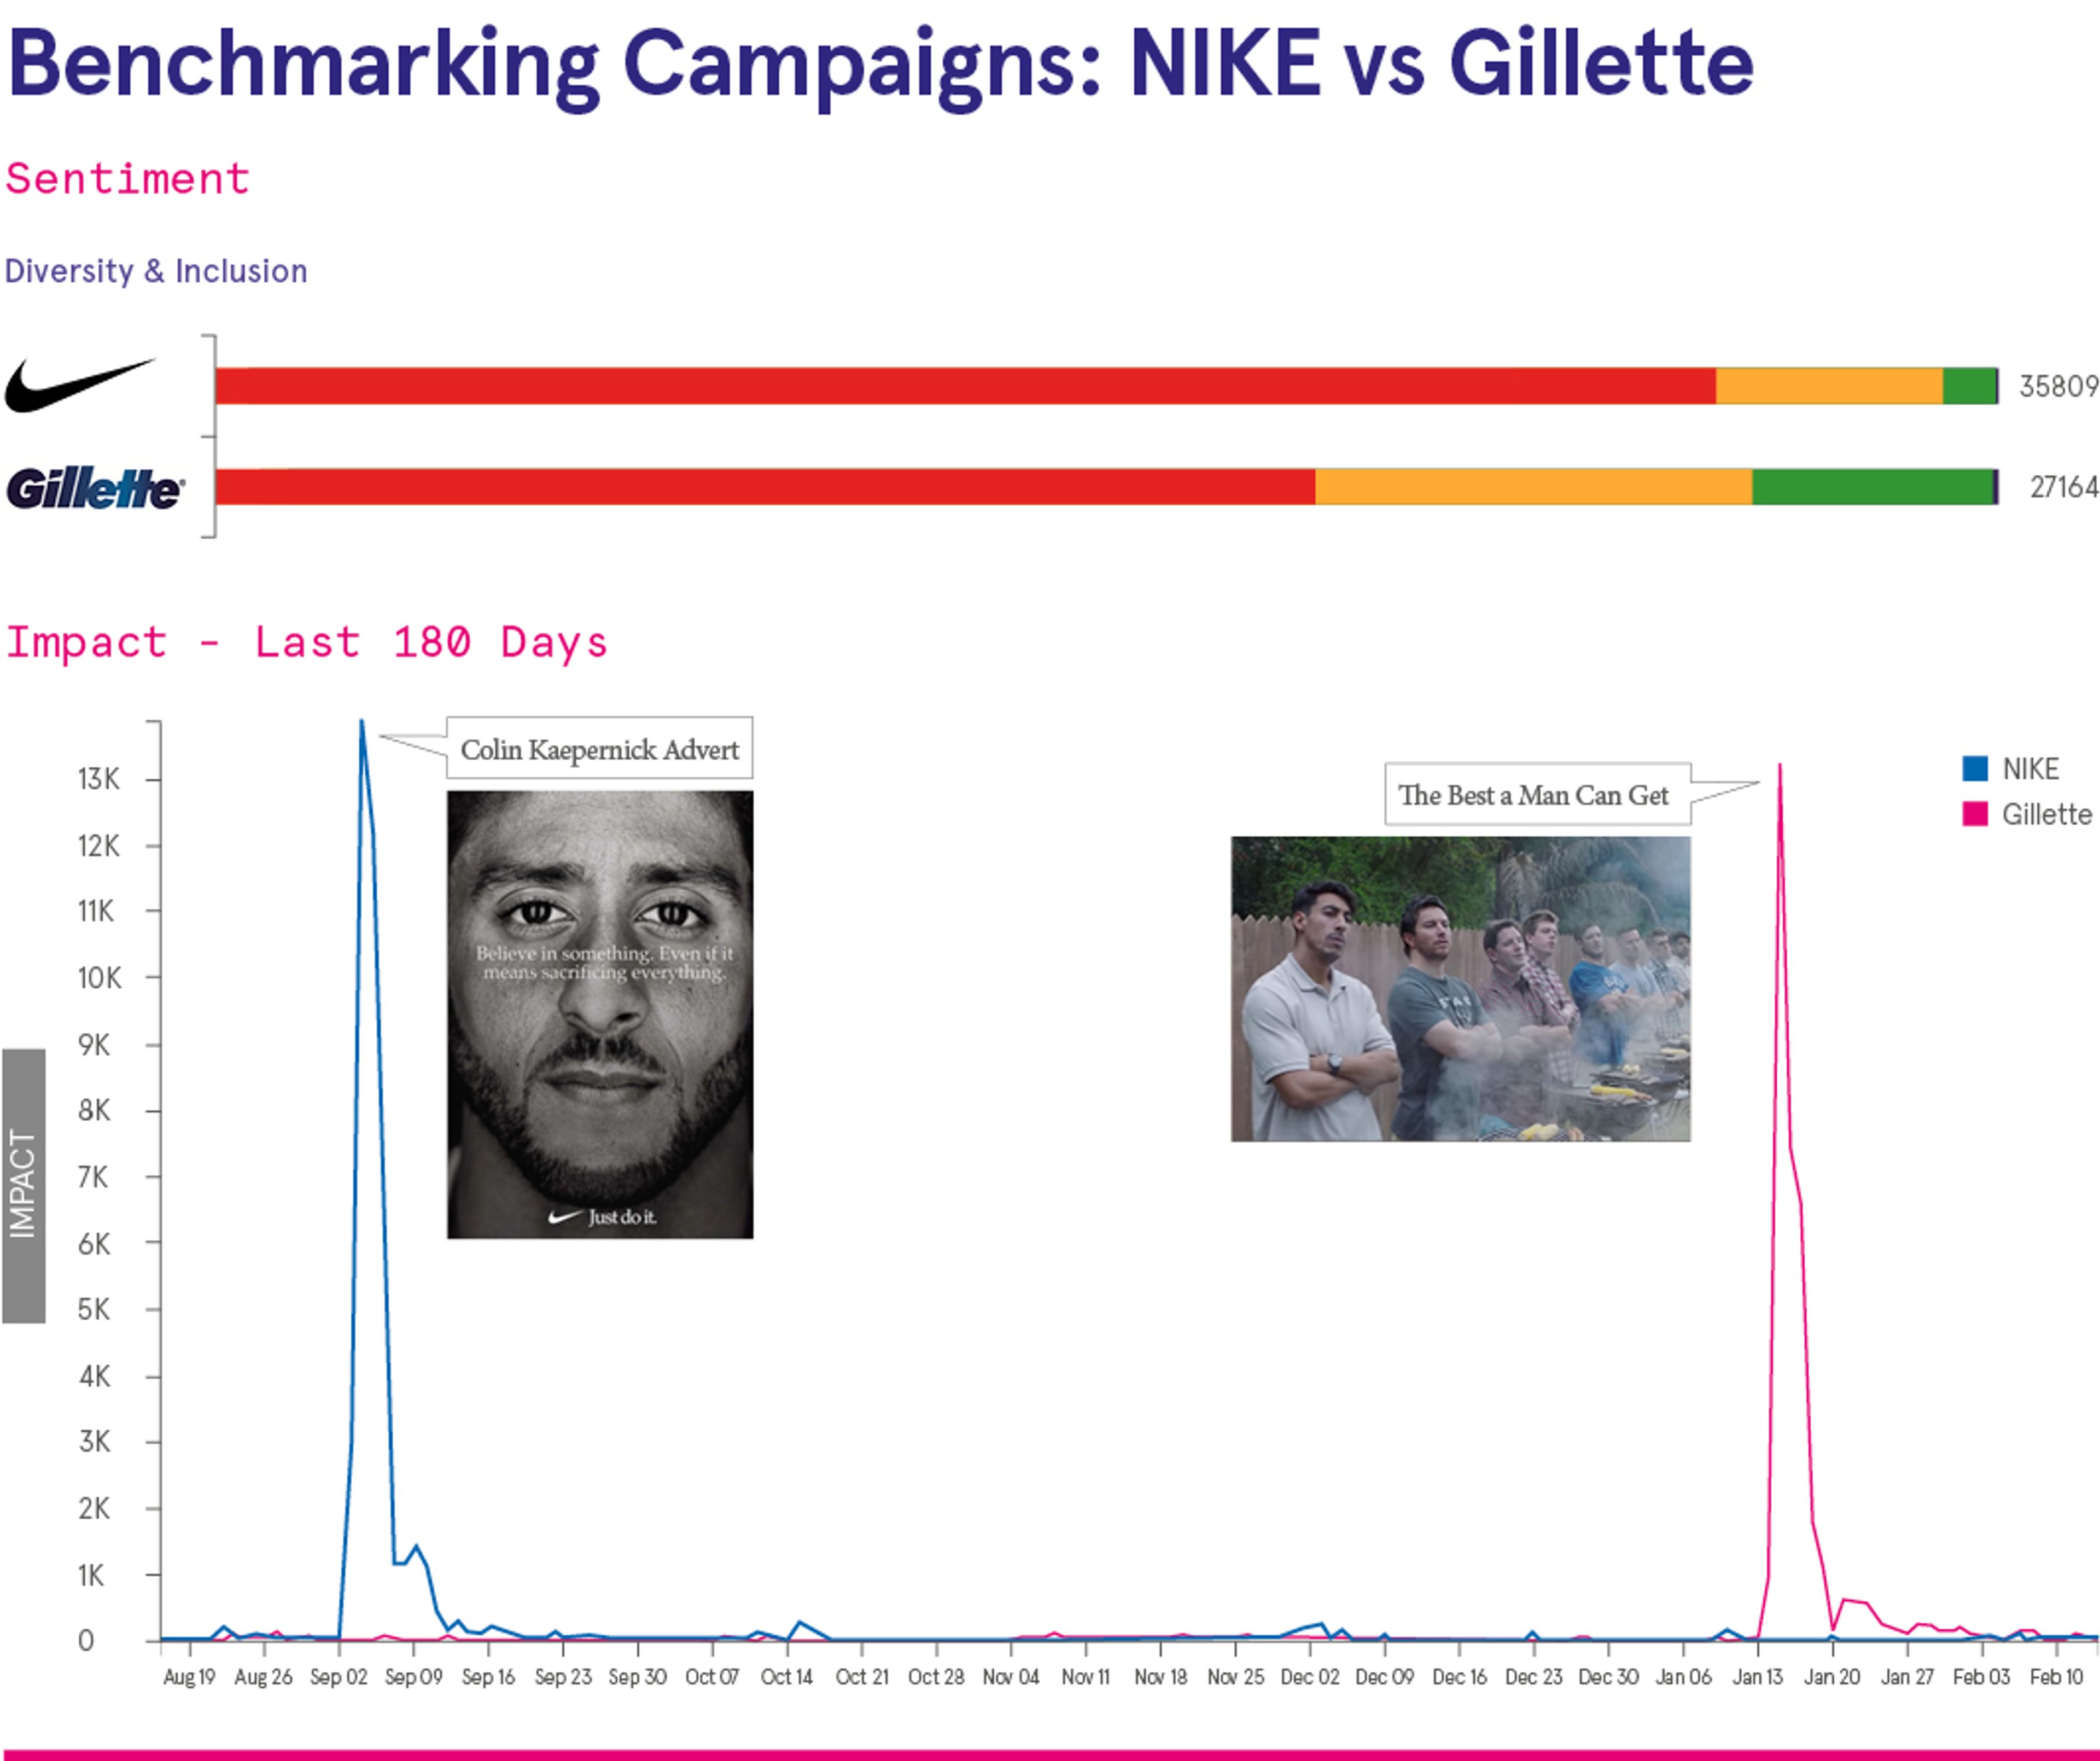 RepVault timeline benchmarking the impact of the Nike Kaepernick ad (blue spike) in Sept 18 and Gillette’s ‘The Best a Man Can Get’ ad in Feb 19